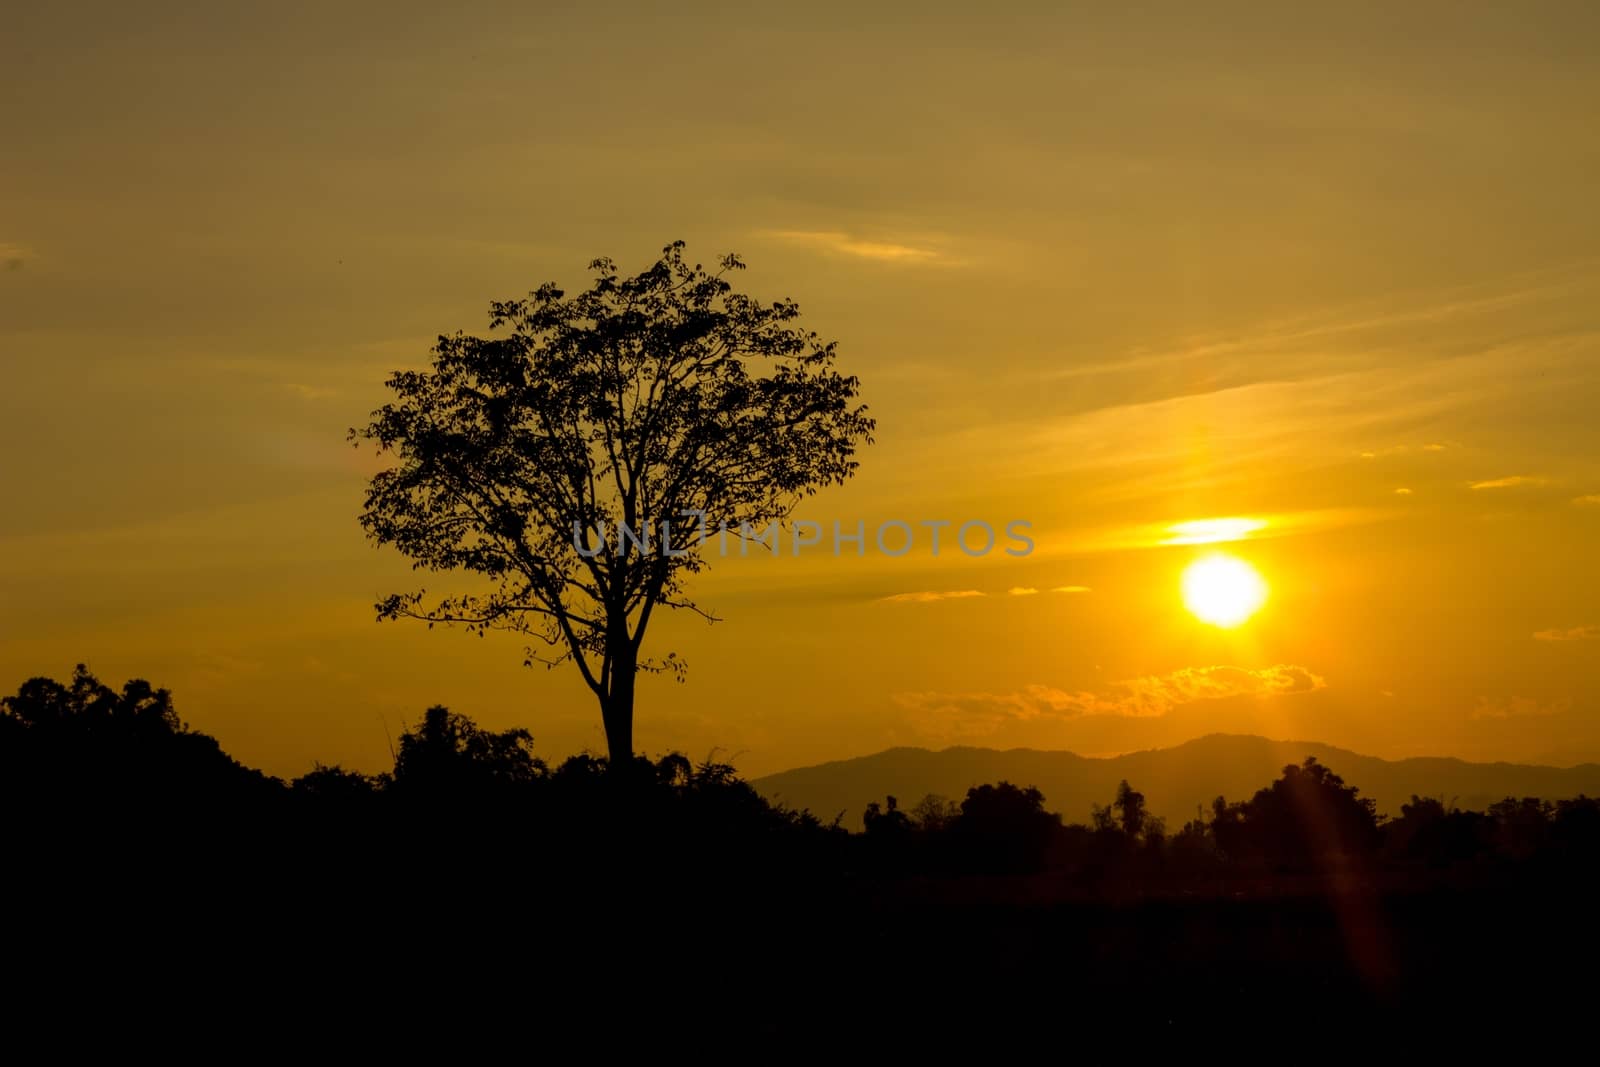 Beautiful landscape image with sun and trees silhouette at sunse by a3701027